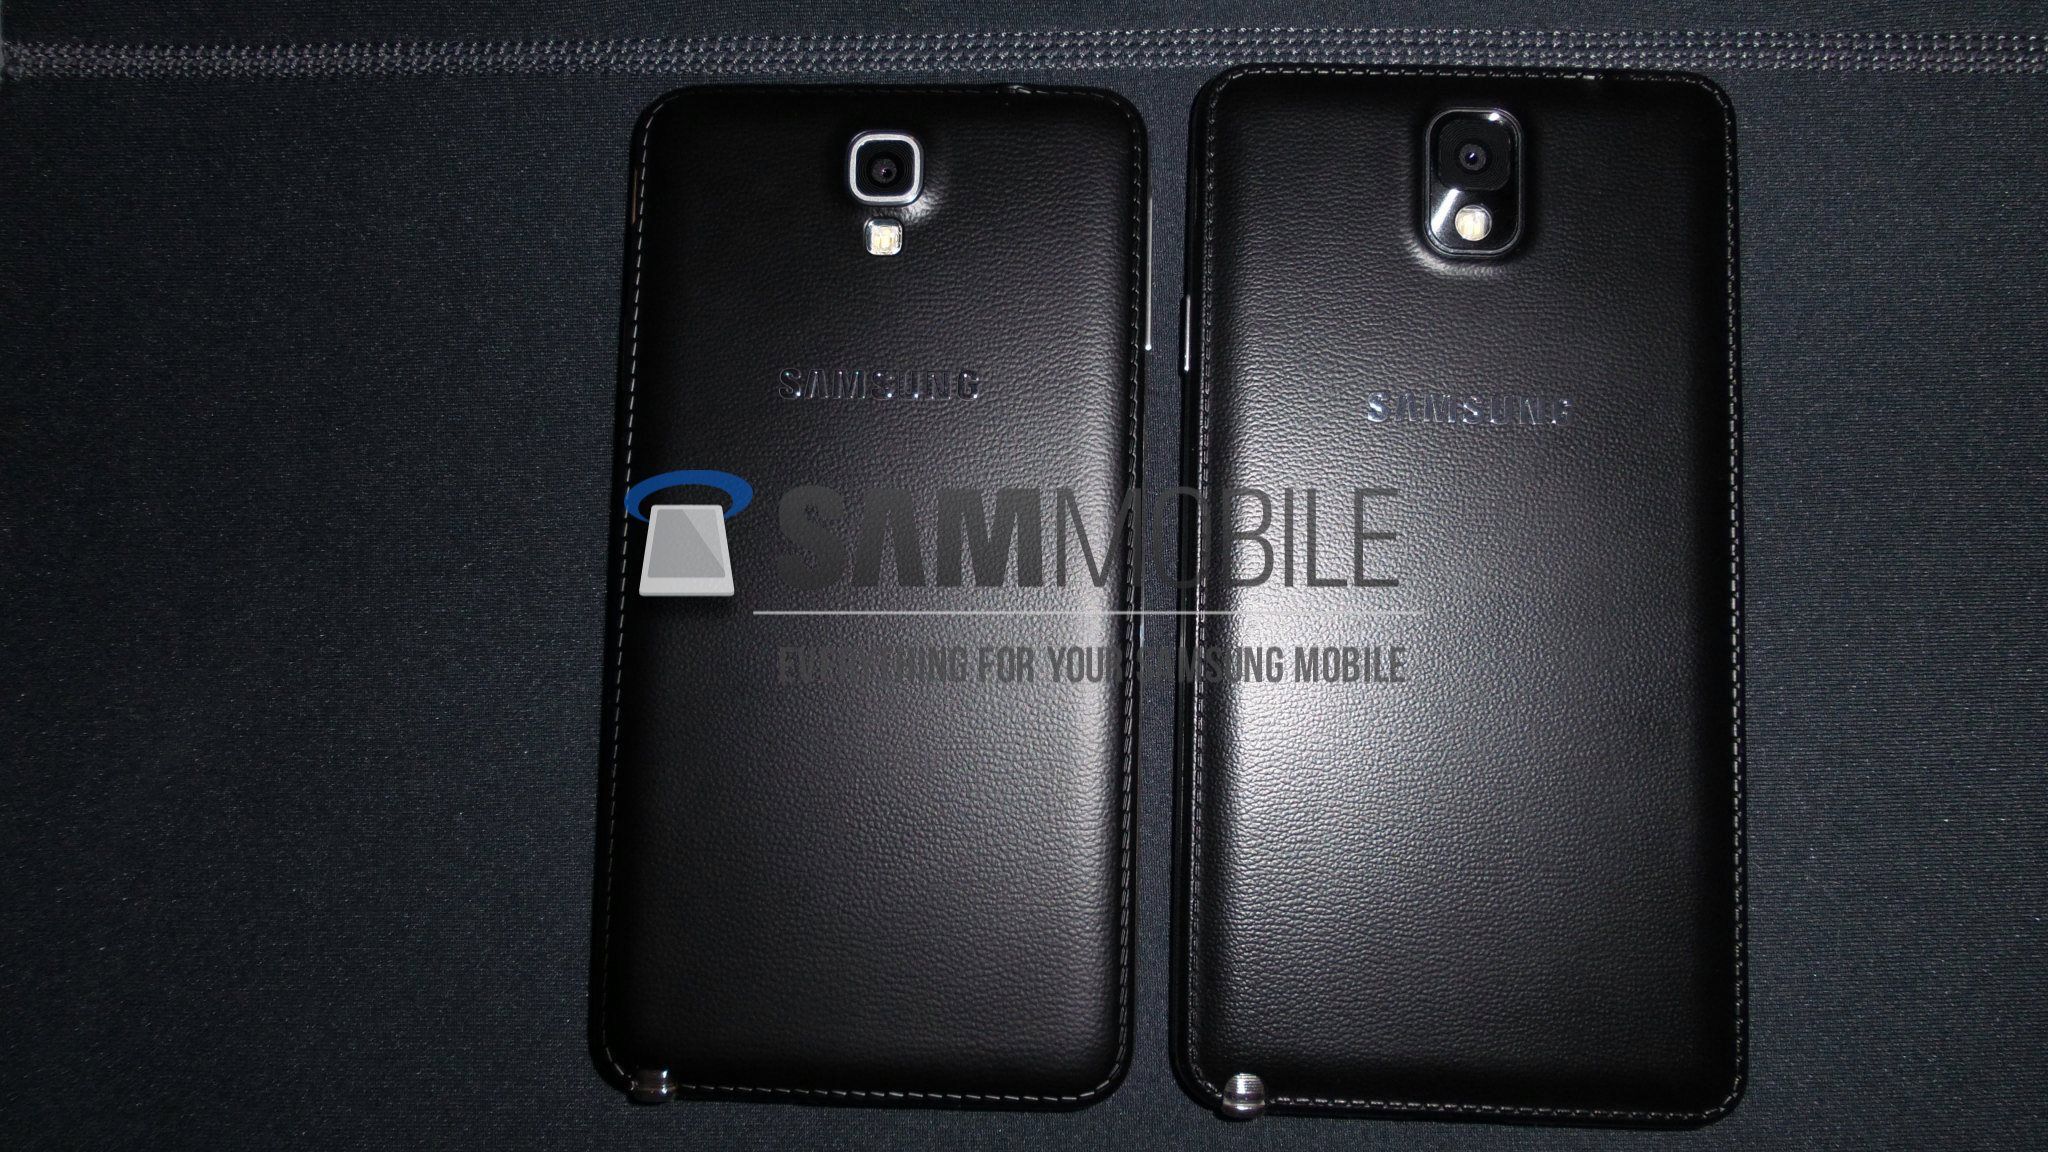 samsung galaxy note 3 lite neo images leak online revealing 5 55 inch 720p display and more image 4